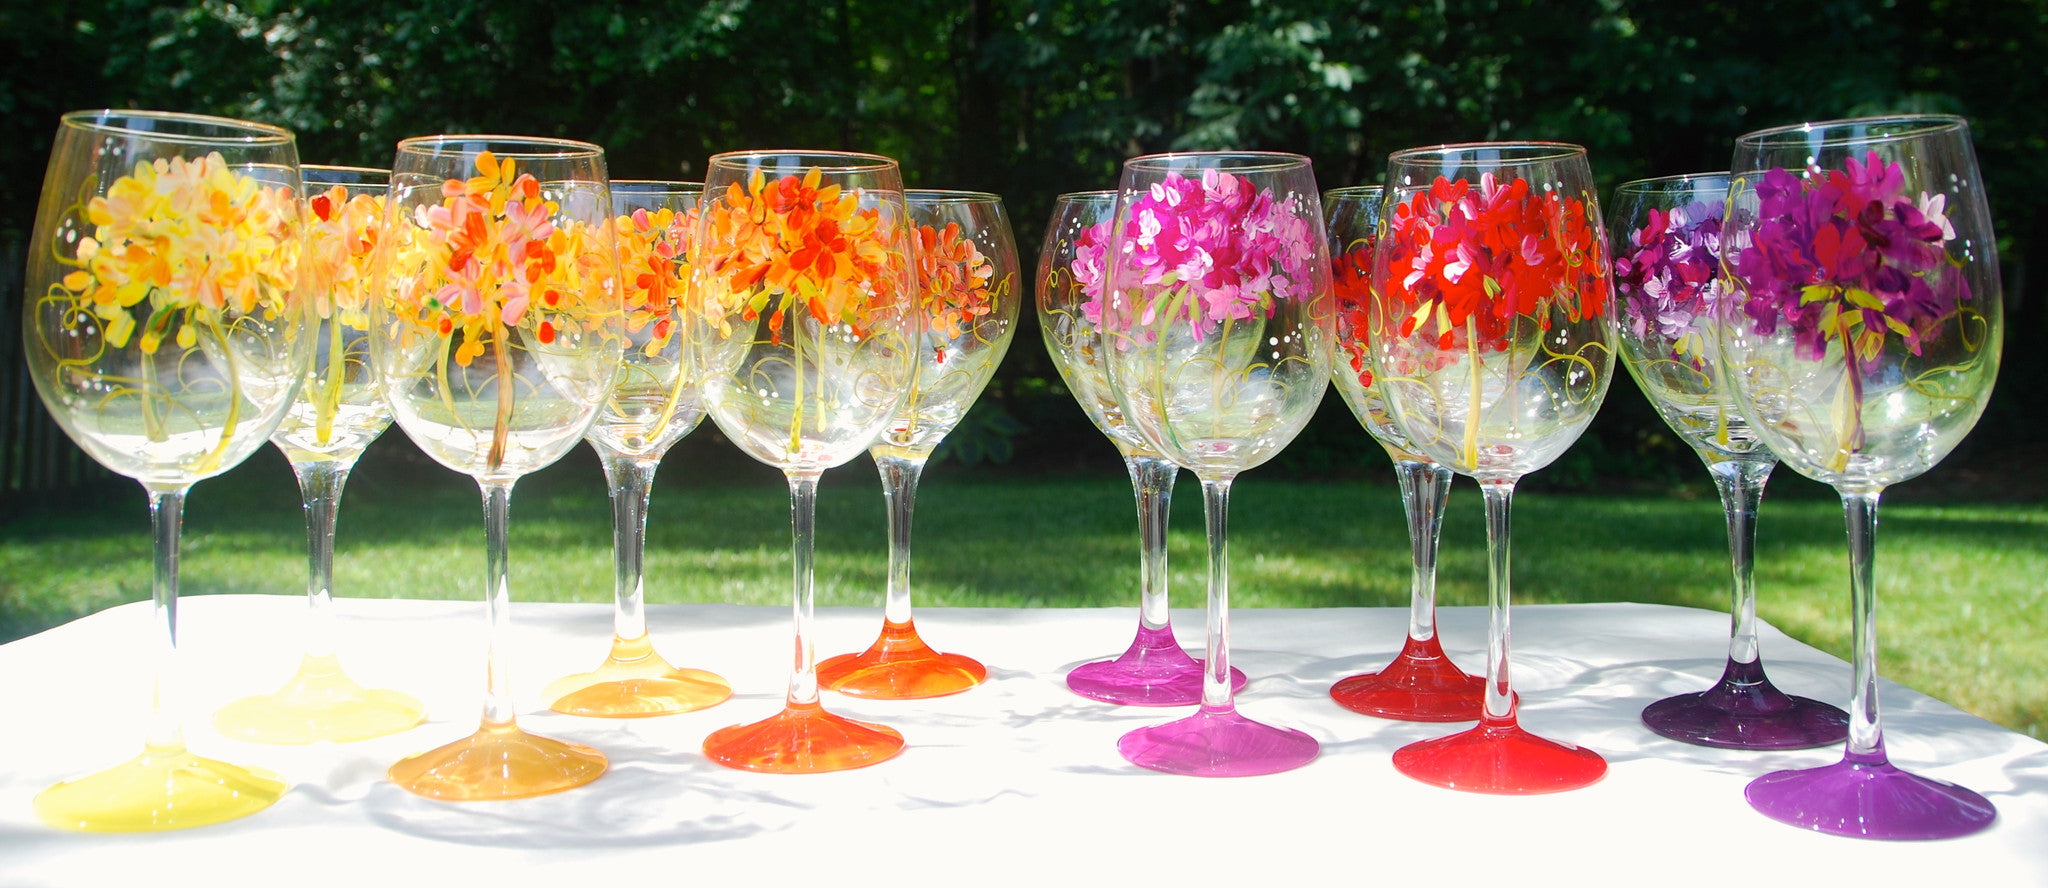 Cavalier Flower Hand-painted Wine Glasses – Glorious Goblets